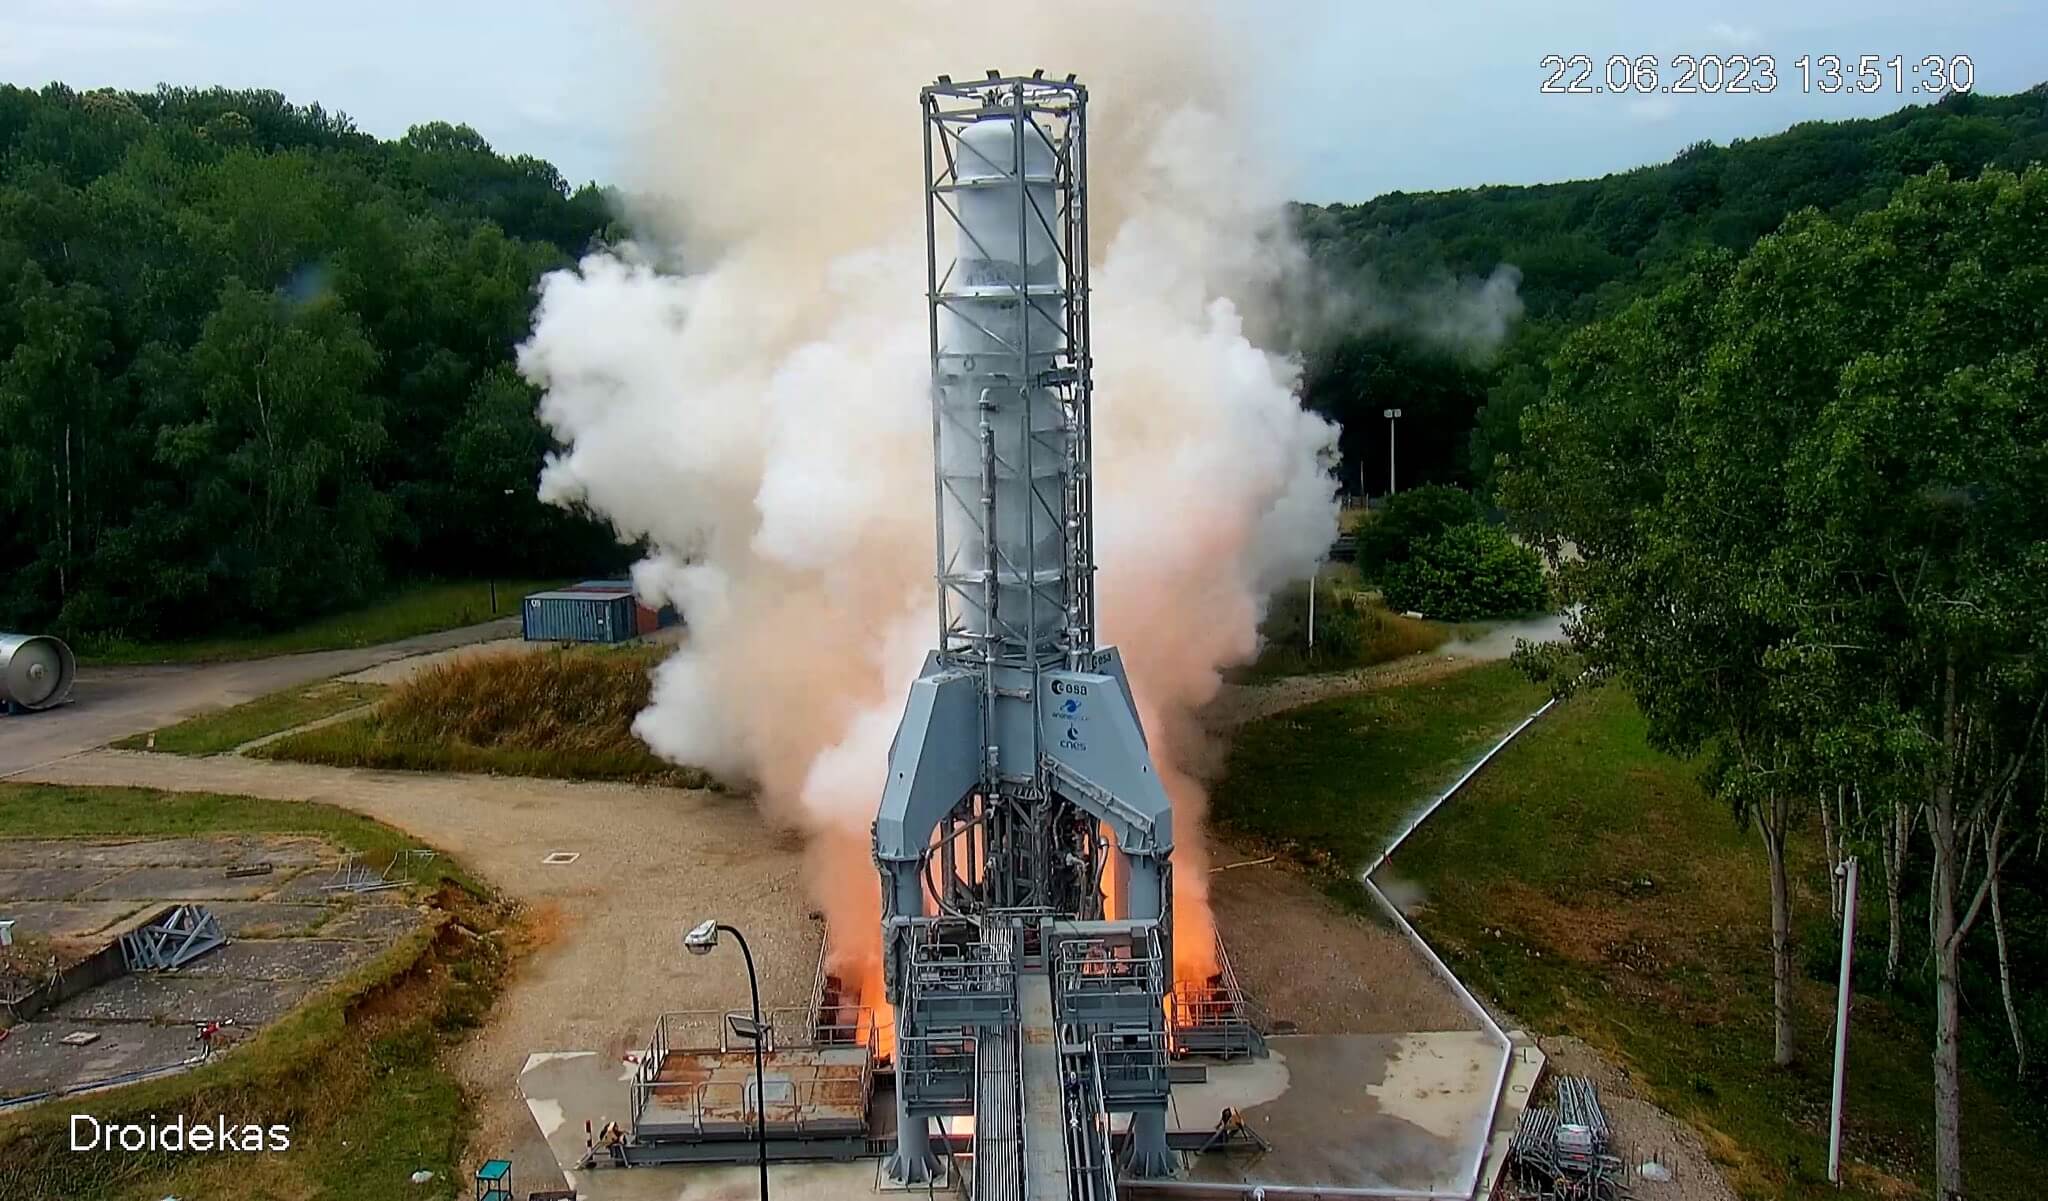 Successful testing of the European rocket engine for the future Prometheus on the Themis reusable stage